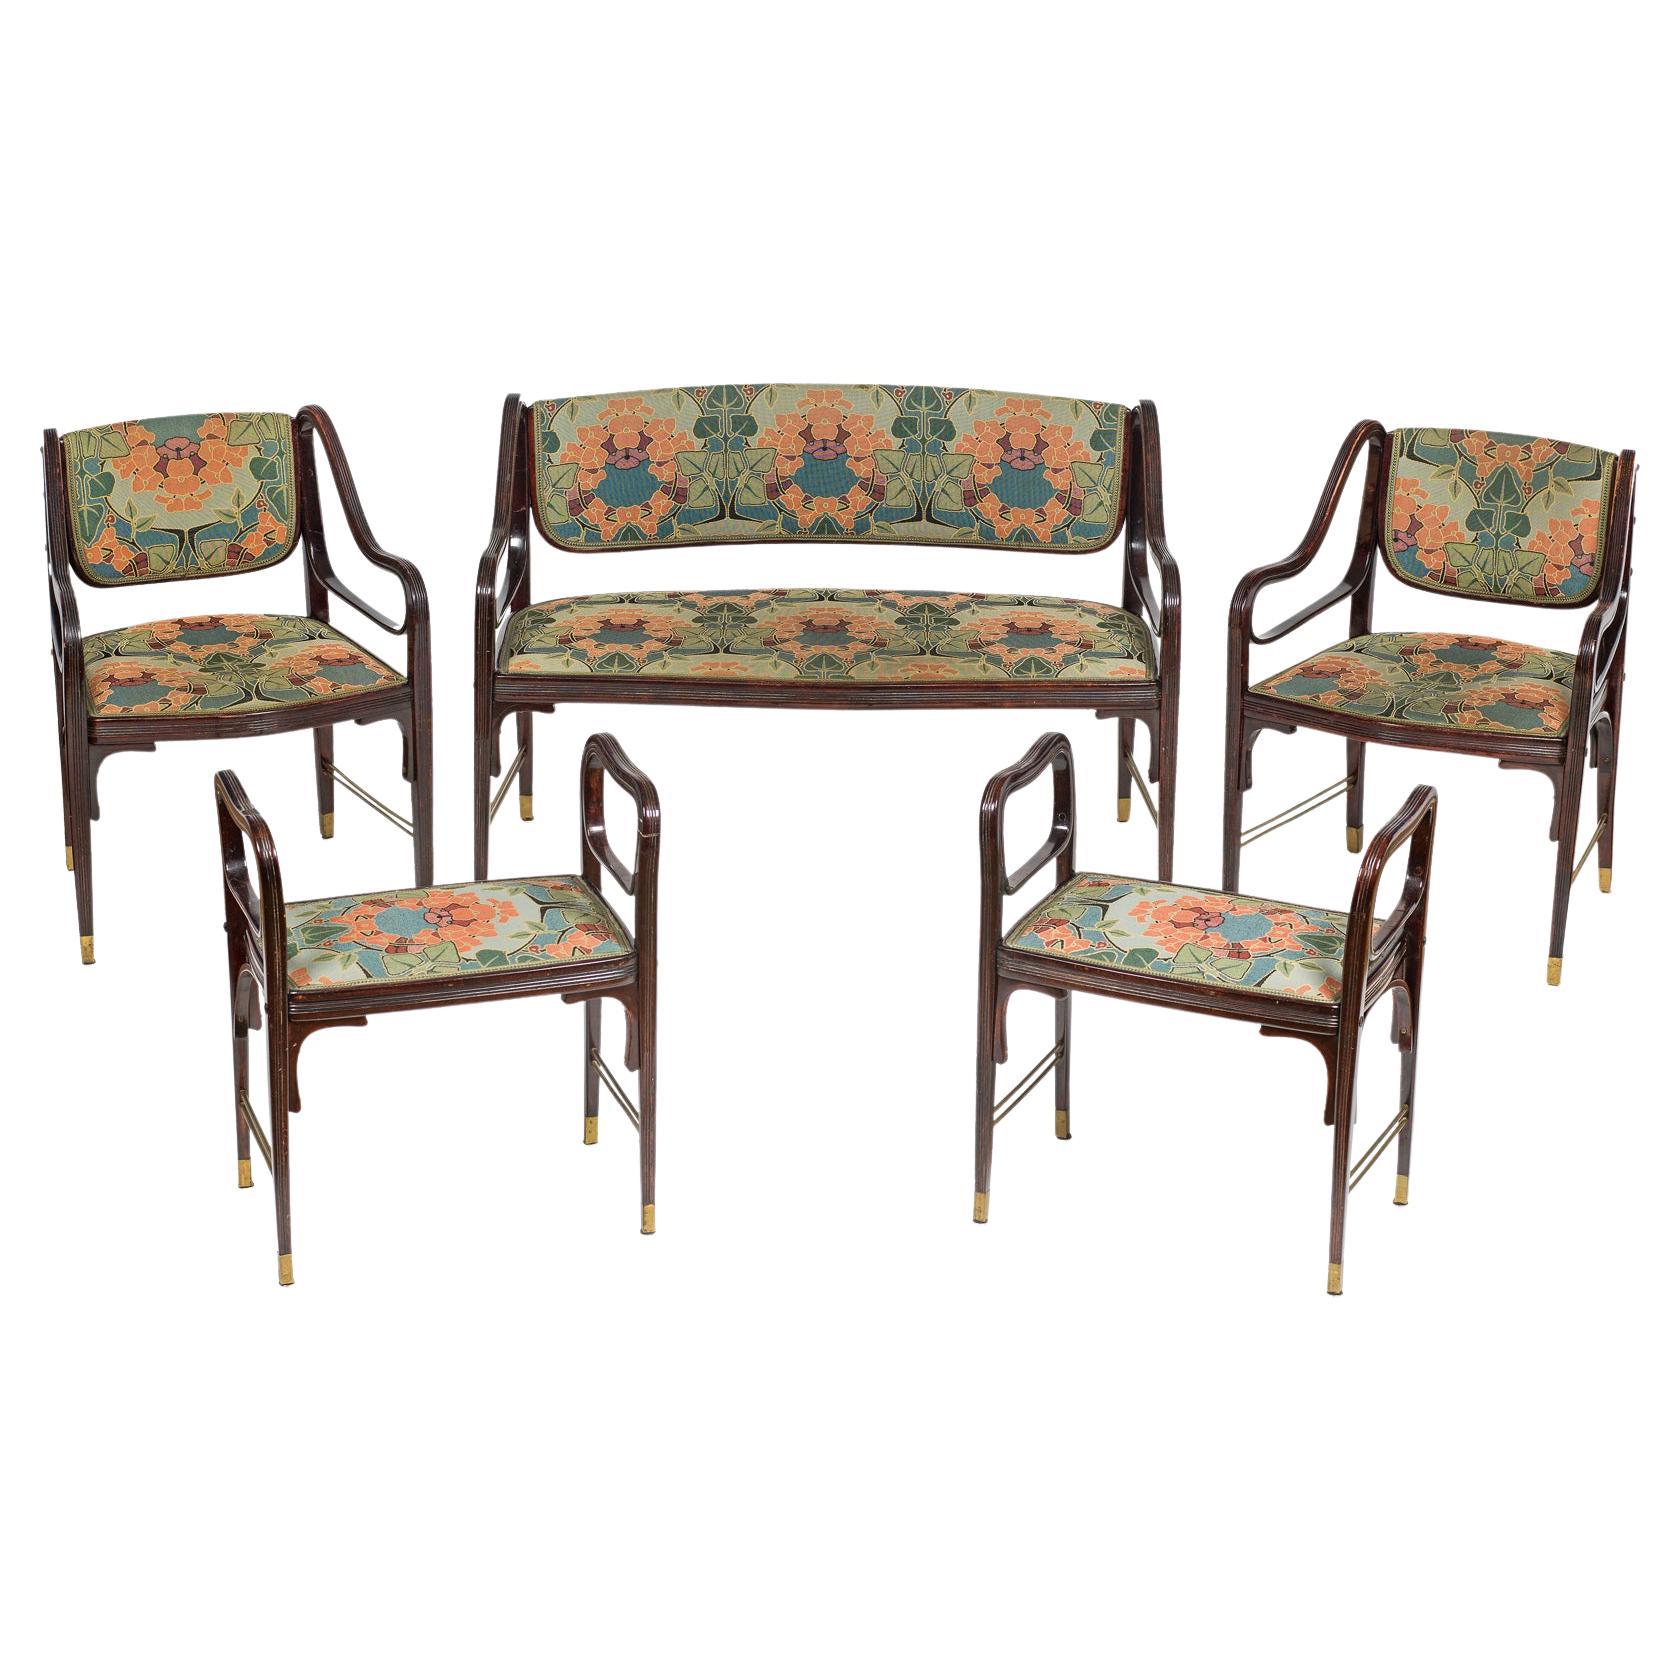 Otto Wagner Living Room Sets